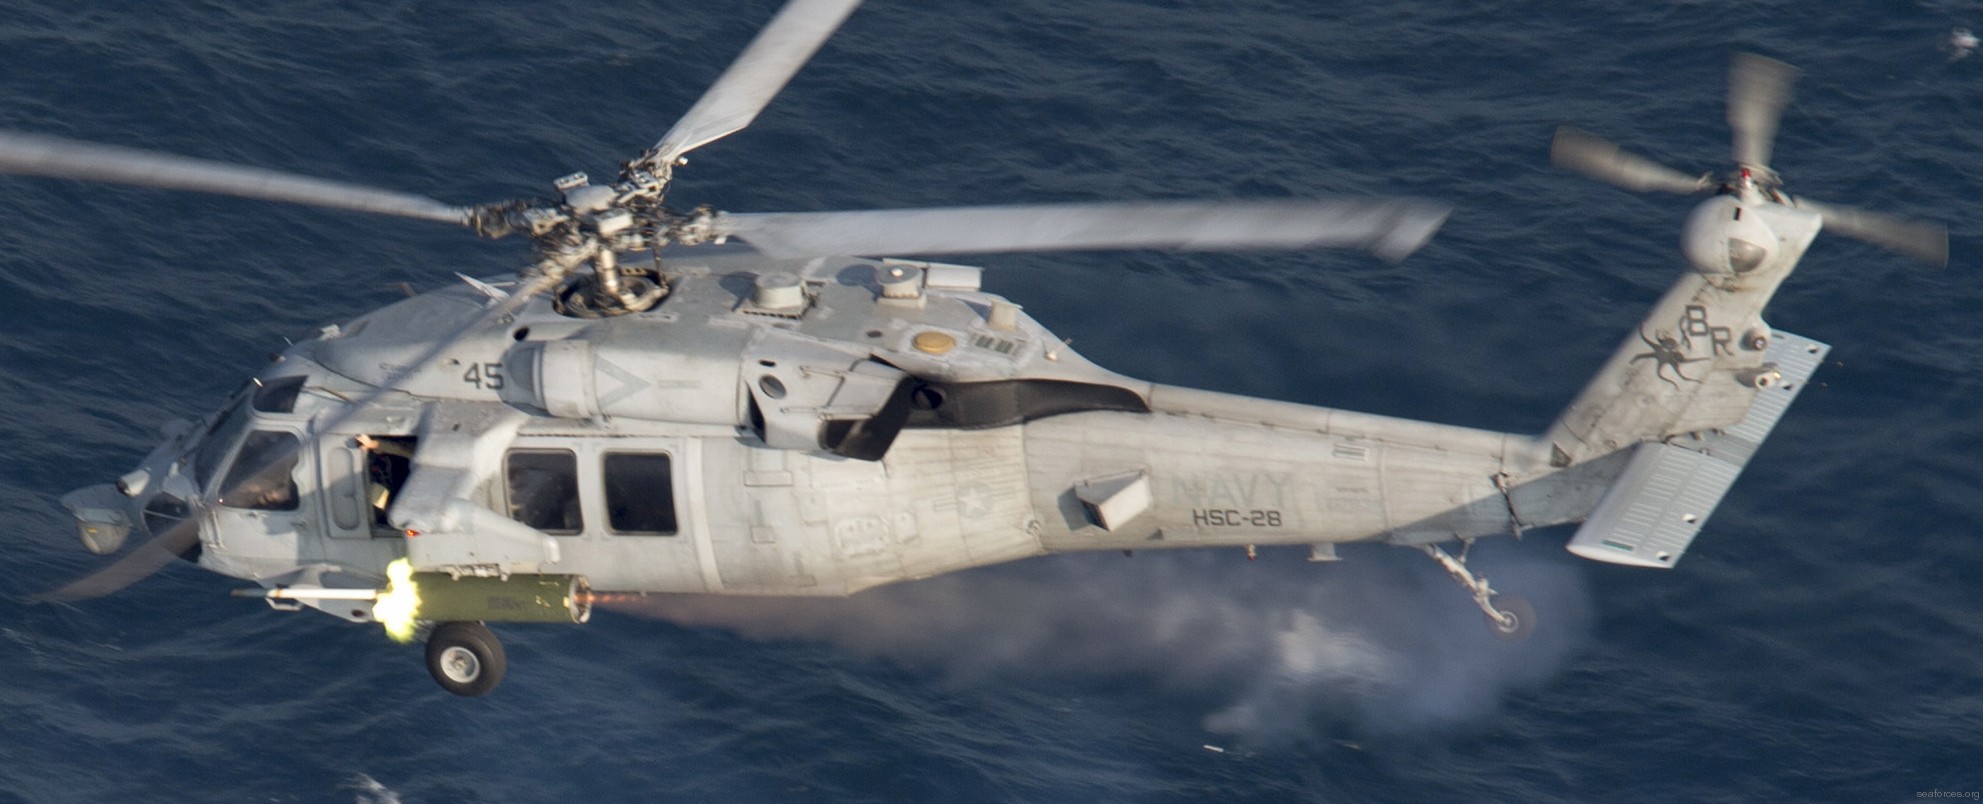 hsc-28 dragon whales helicopter sea combat squadron mh-60s seahawk us navy 236 zuni 2.75 inch rocket